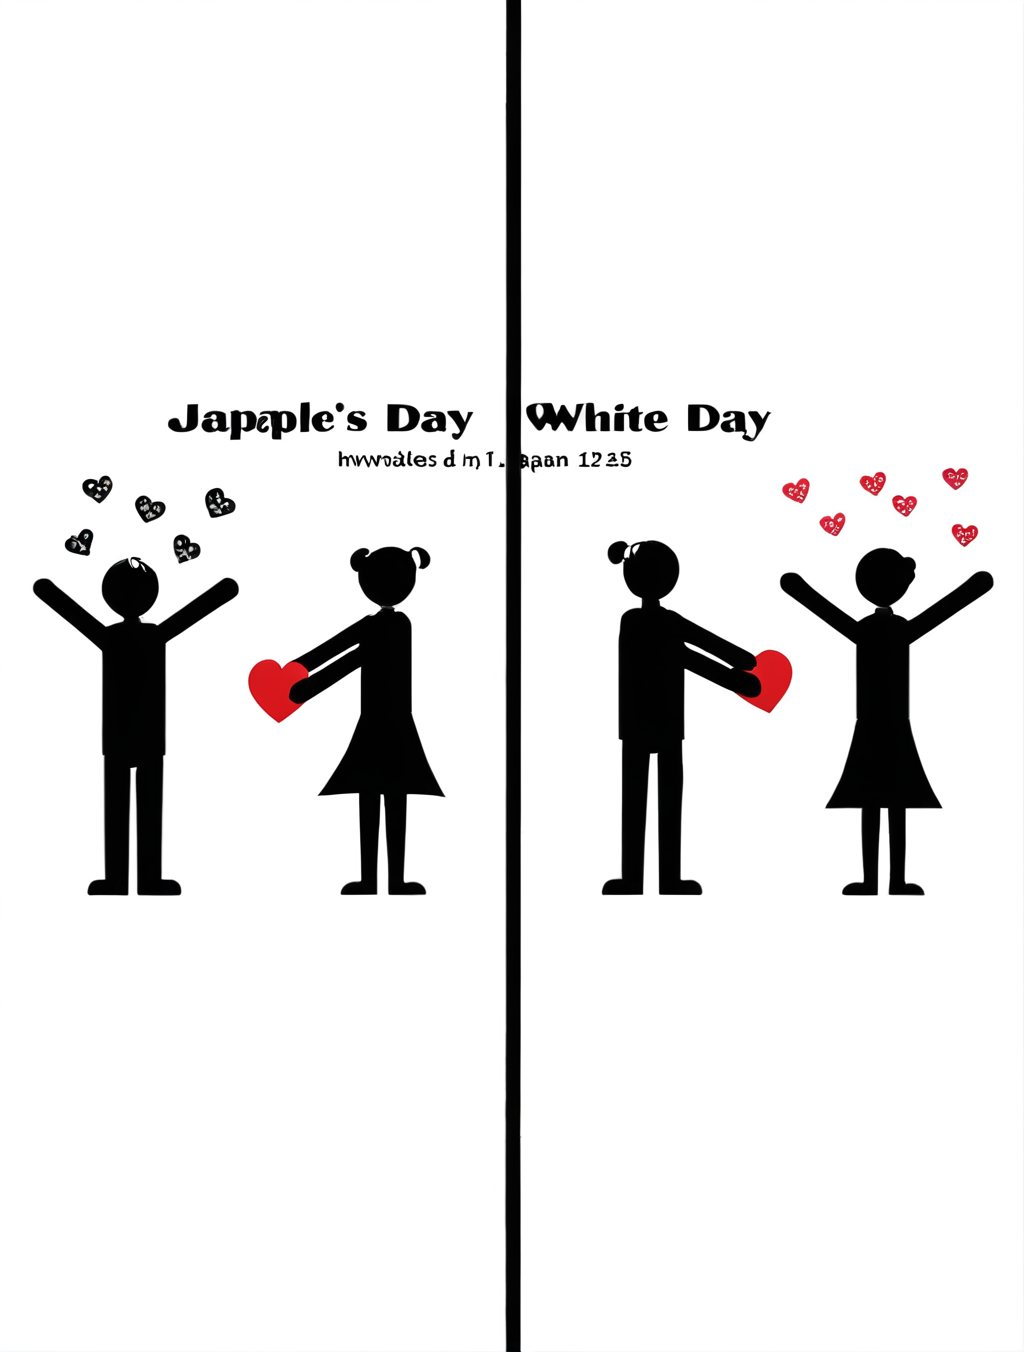 when is white day in japan